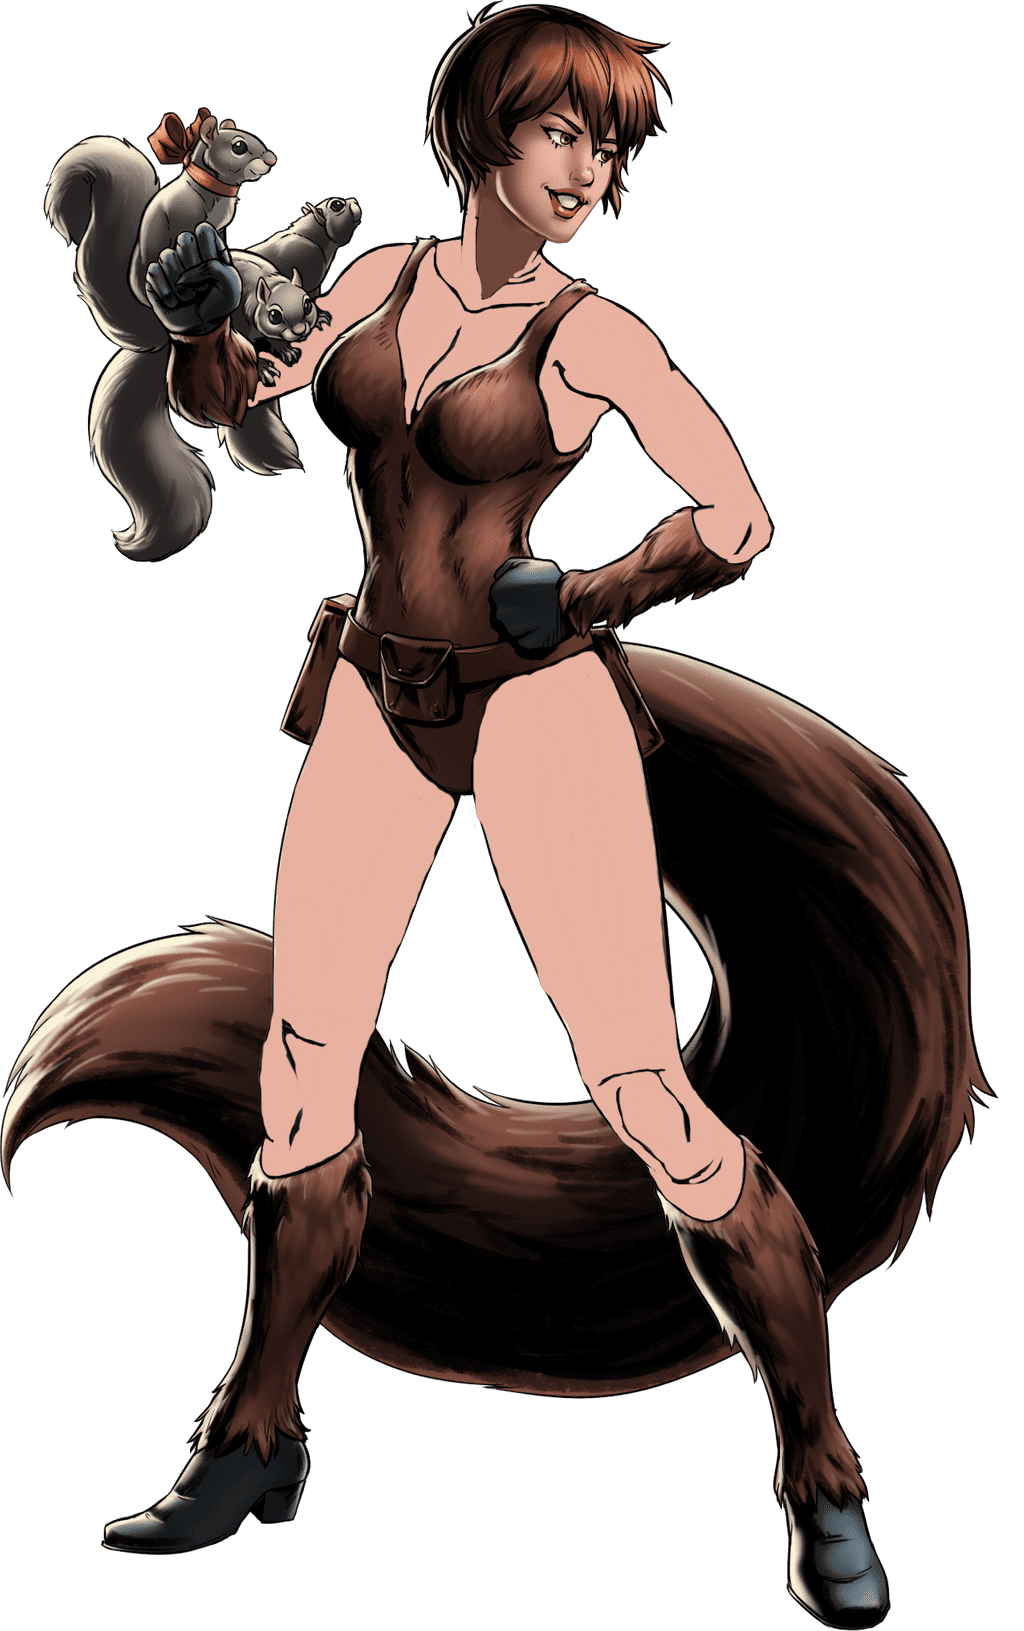 51 Hot Pictures Of Squirrel Girl Are Simply Excessively Damn Delectable 48